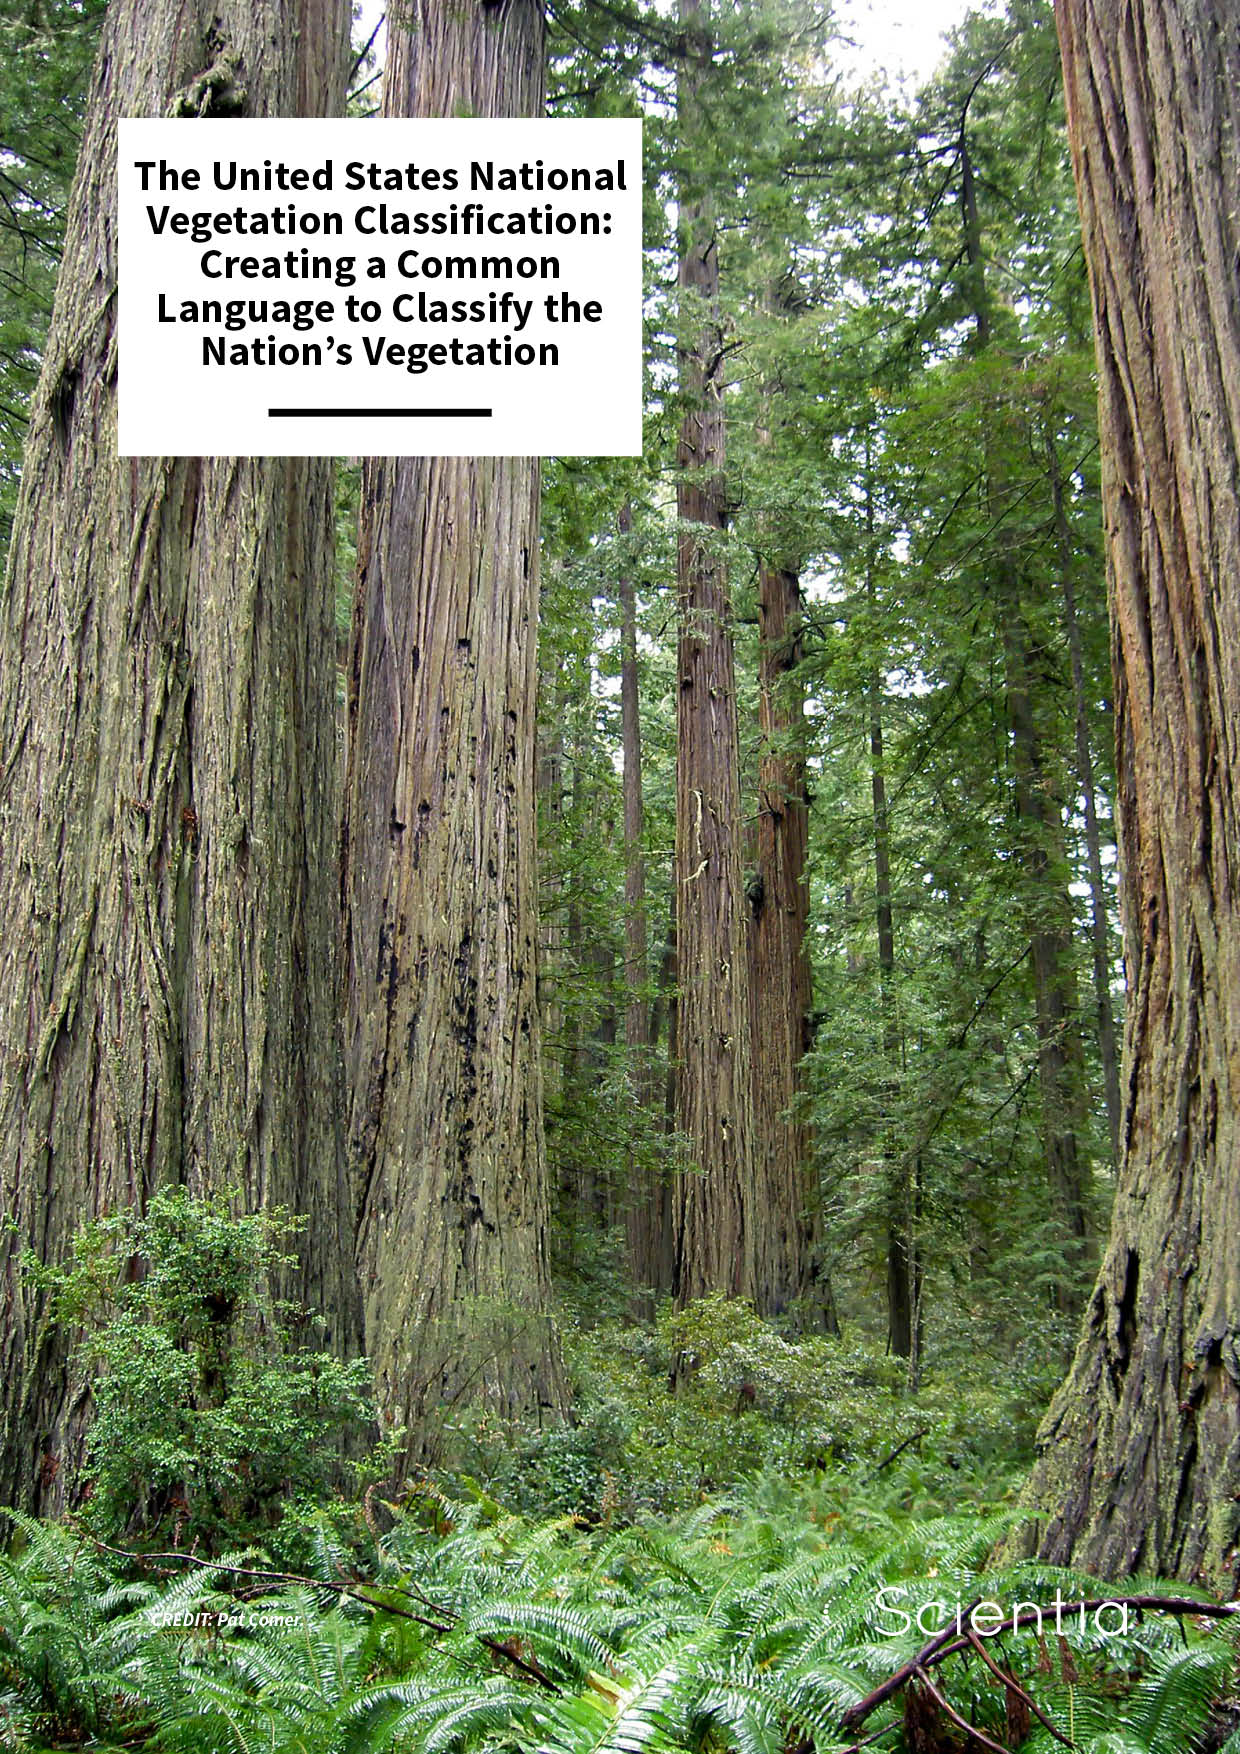 The United States National Vegetation Classification: Creating A Common Language To Classify The Nation’s Vegetation